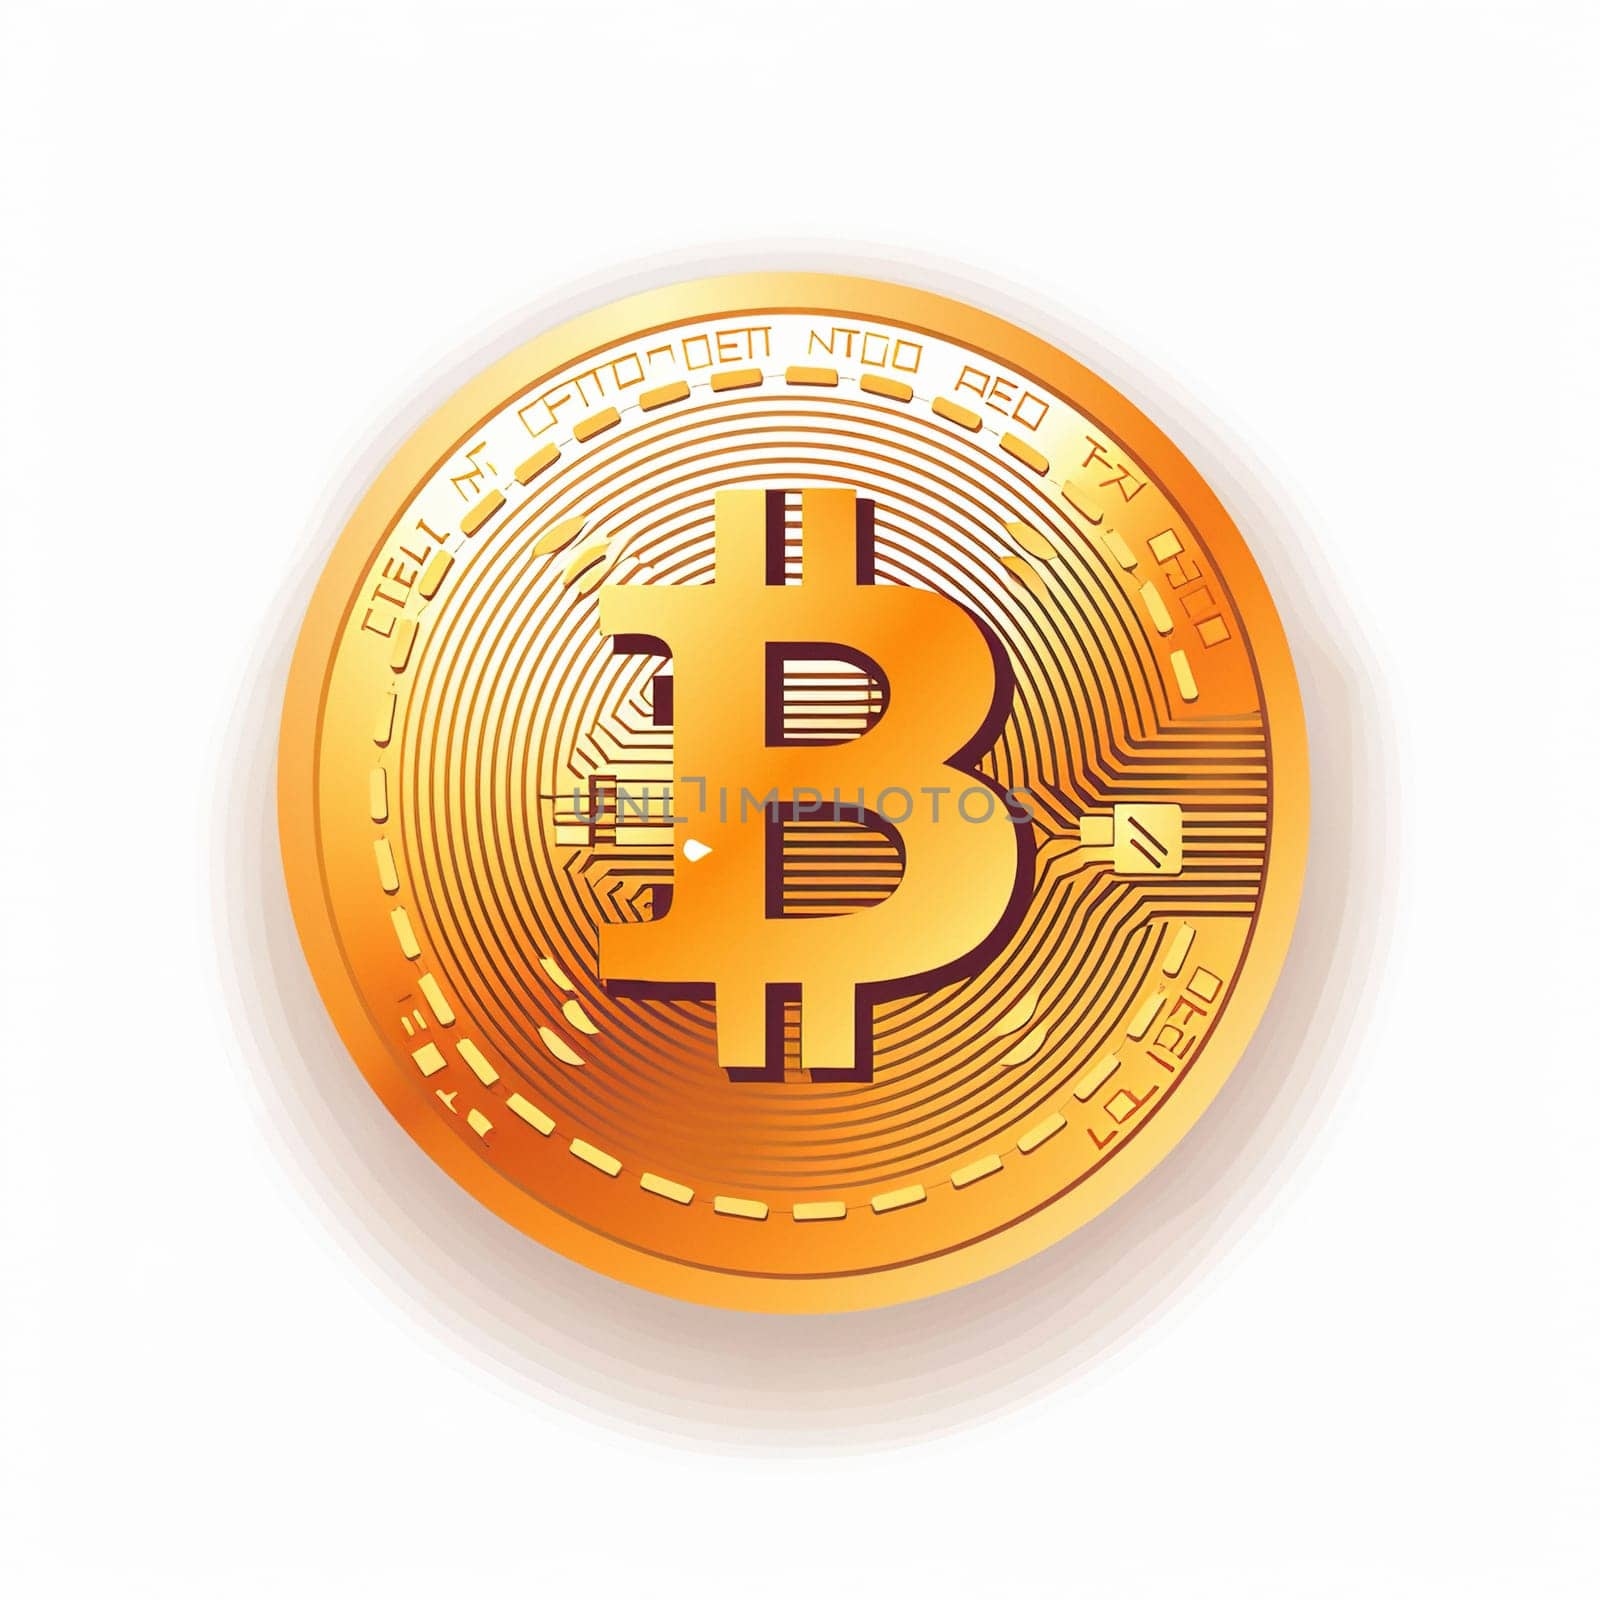 Bitcoin image isolated on white background for versatile usage in financial and cryptocurrency related designs illustration